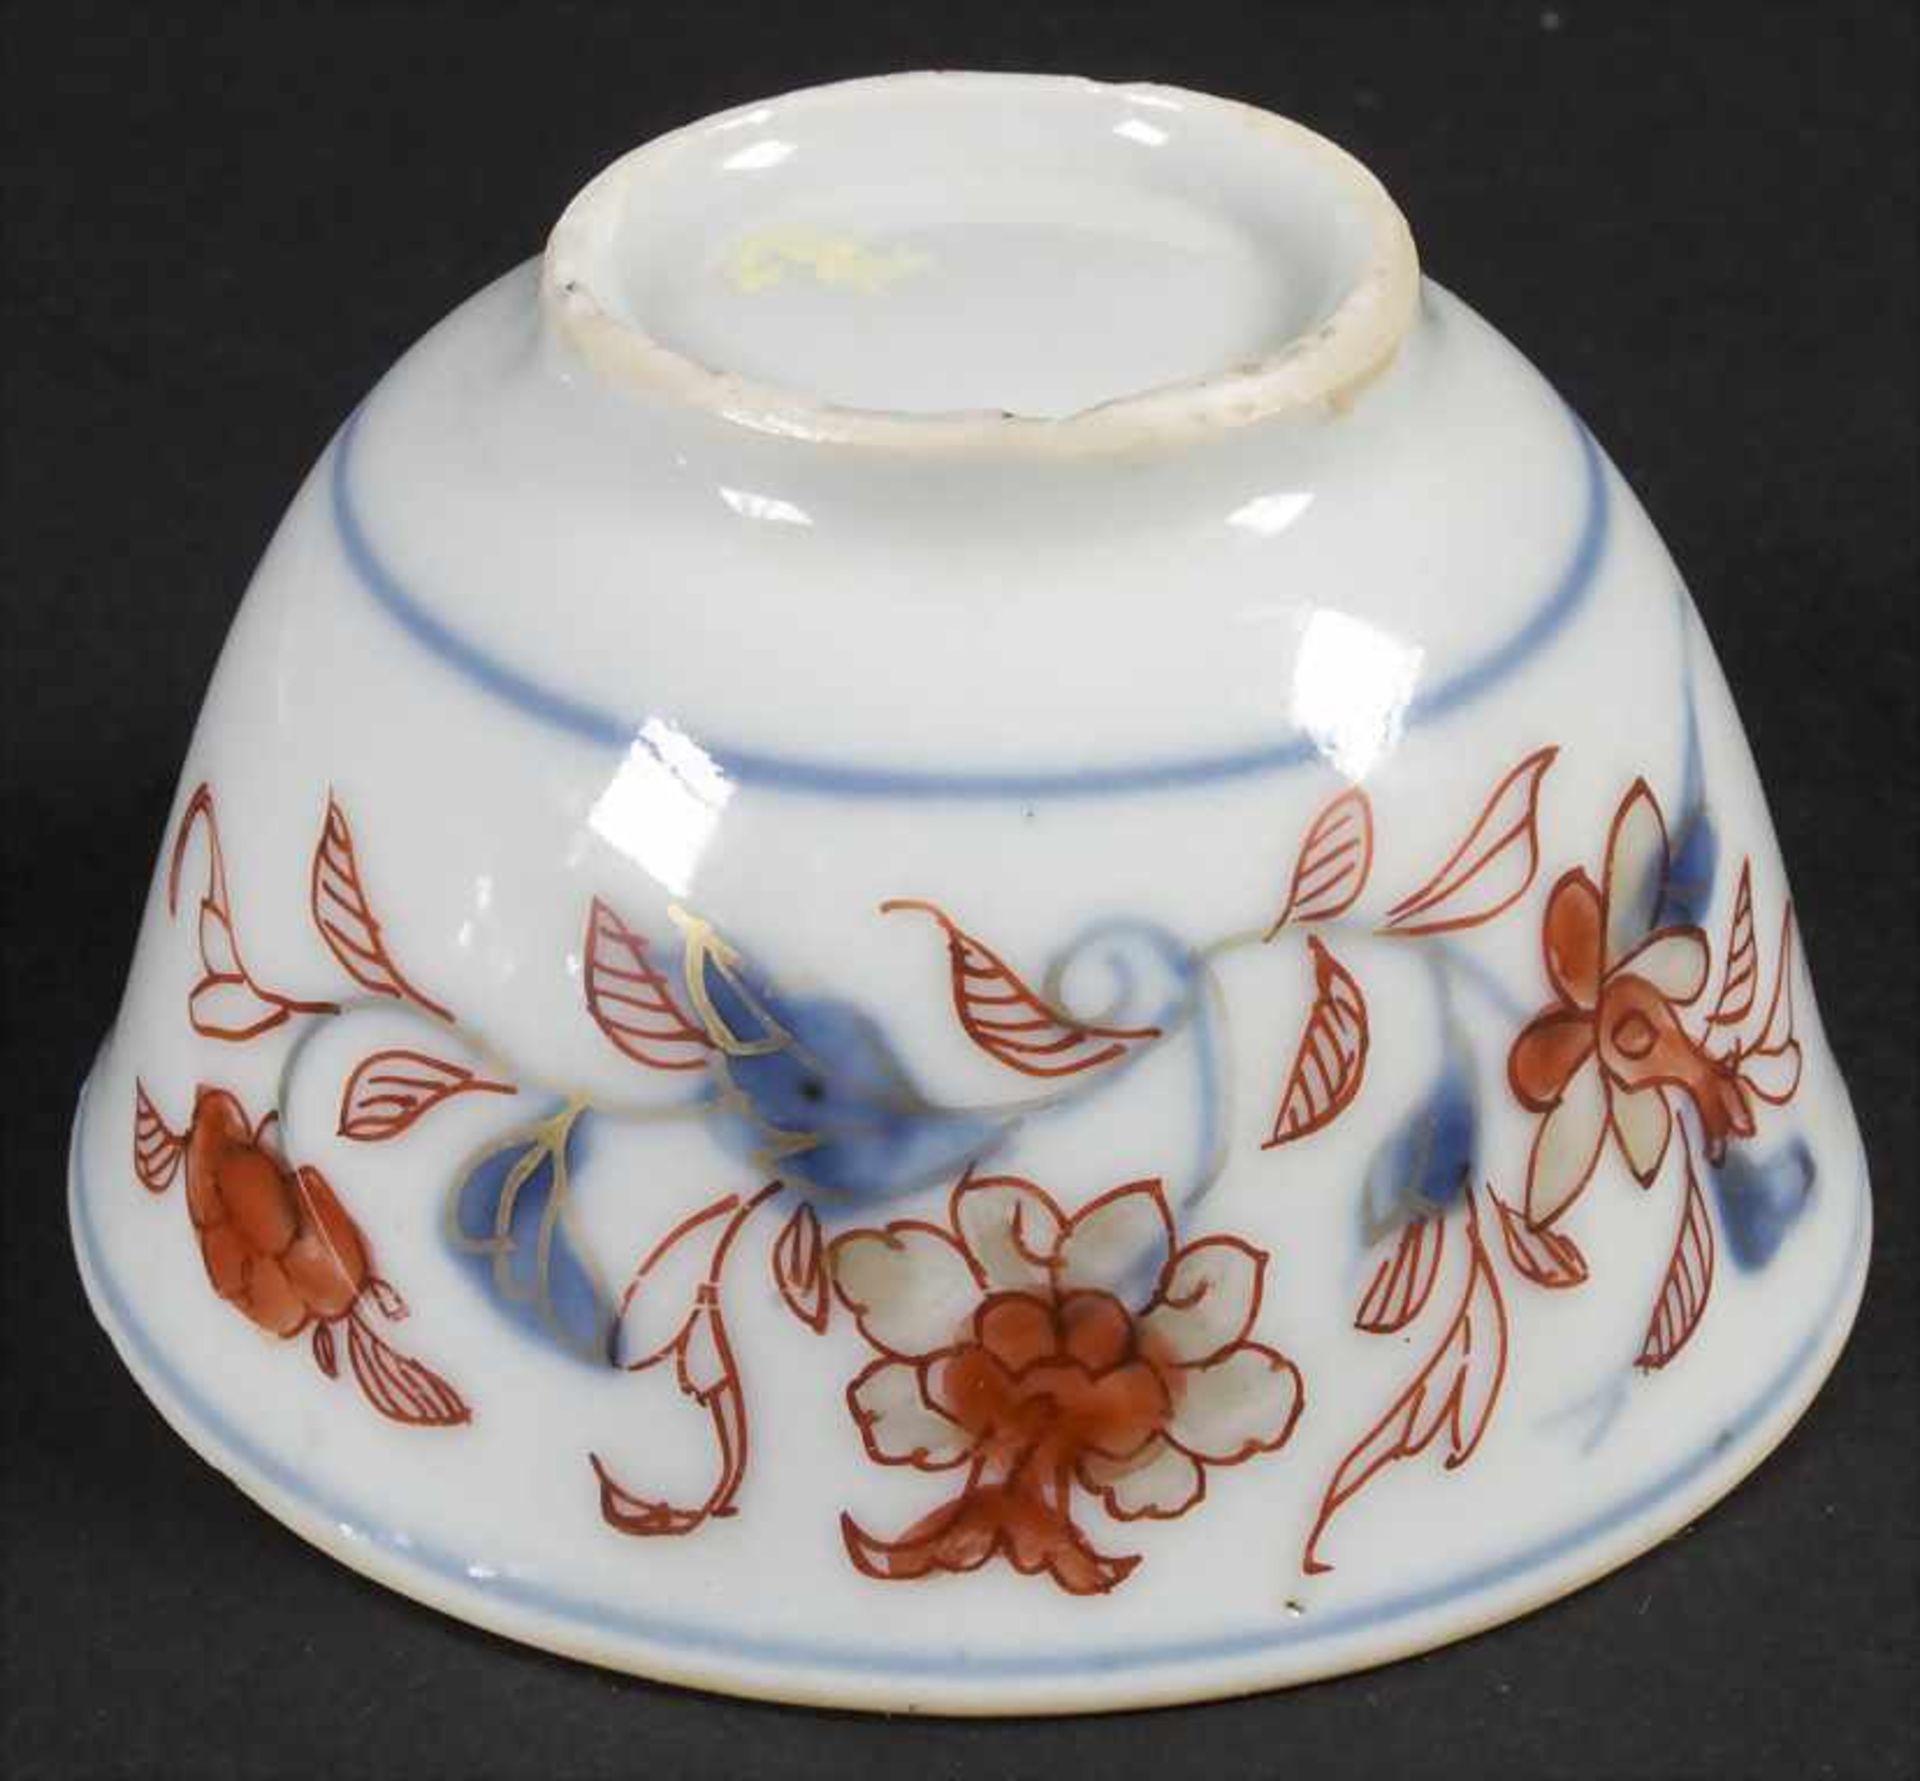 Kumme mit Unterteller / A porcelain bowl with saucer, China, Qing-Dynastie (1644-1911), wohl 18. - Image 5 of 6